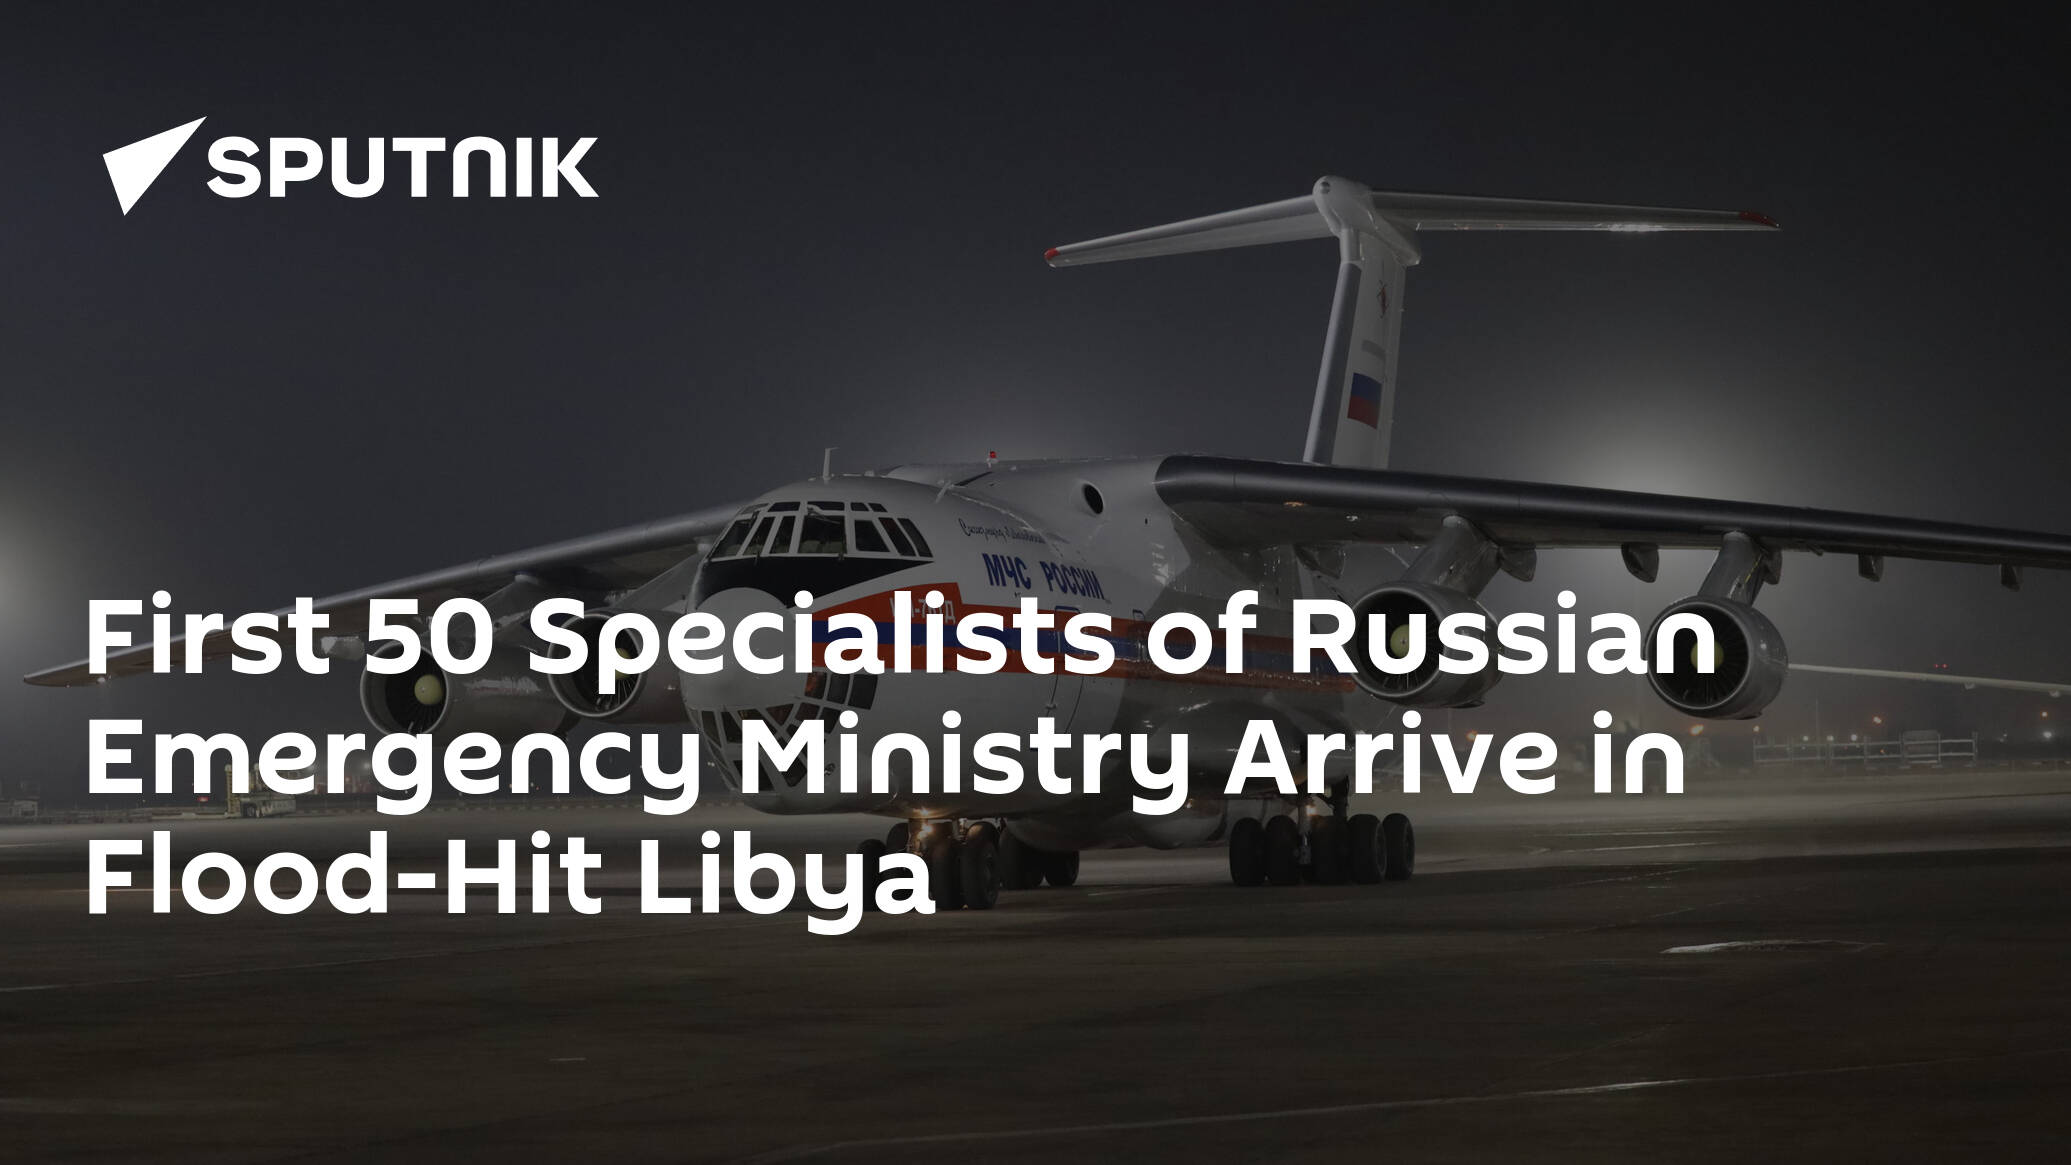 First 50 Specialists of Russian Emergency Ministry Arrive in Flood-Hit Libya